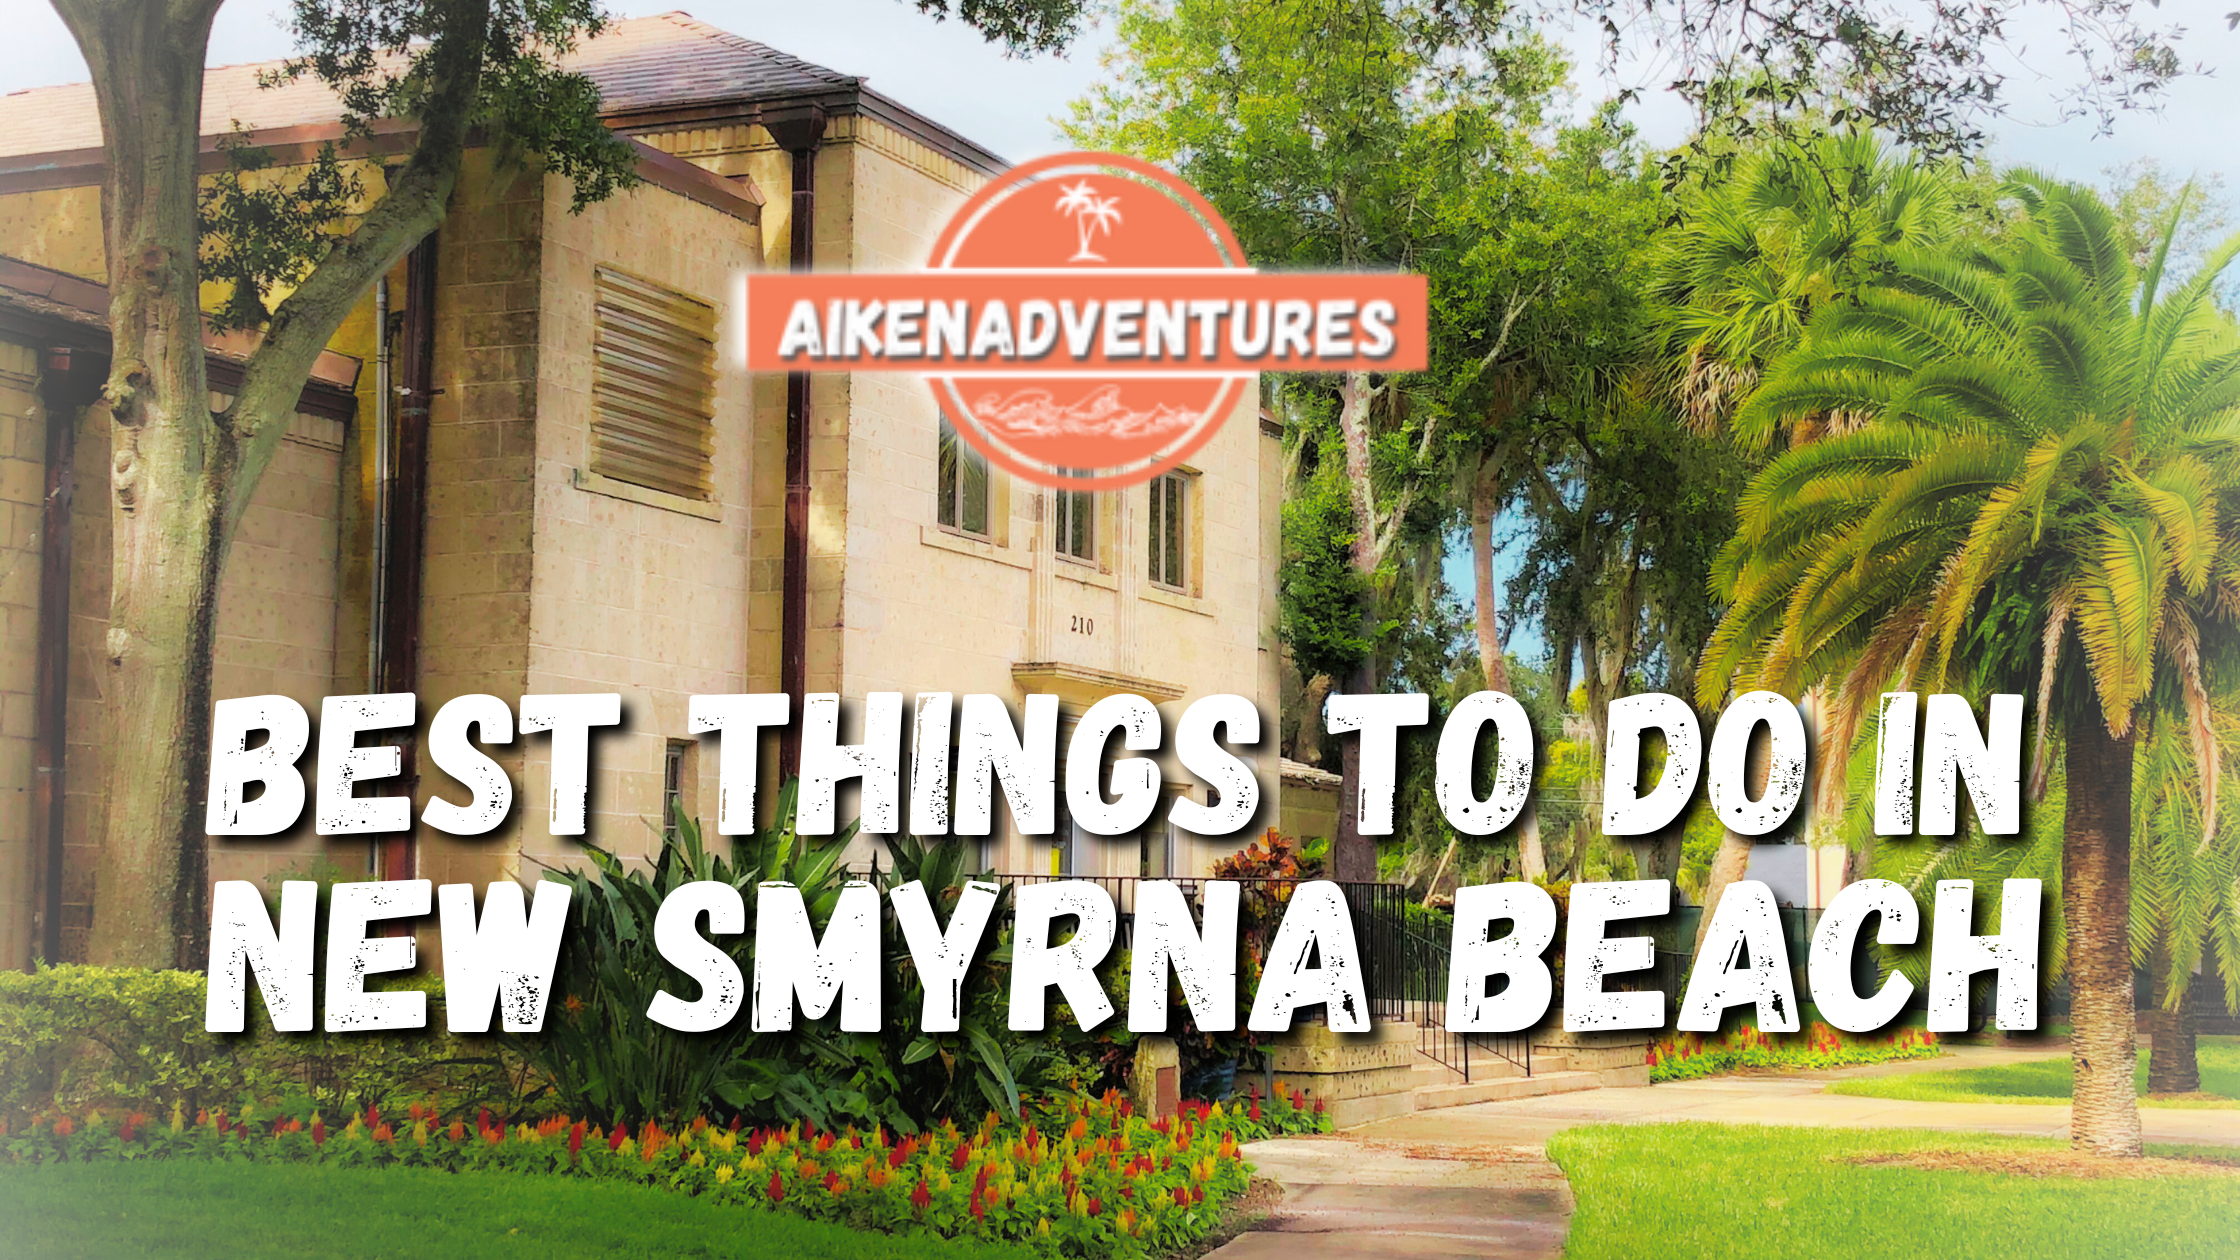 Best Things to do in New Smyrna Beach, Florida